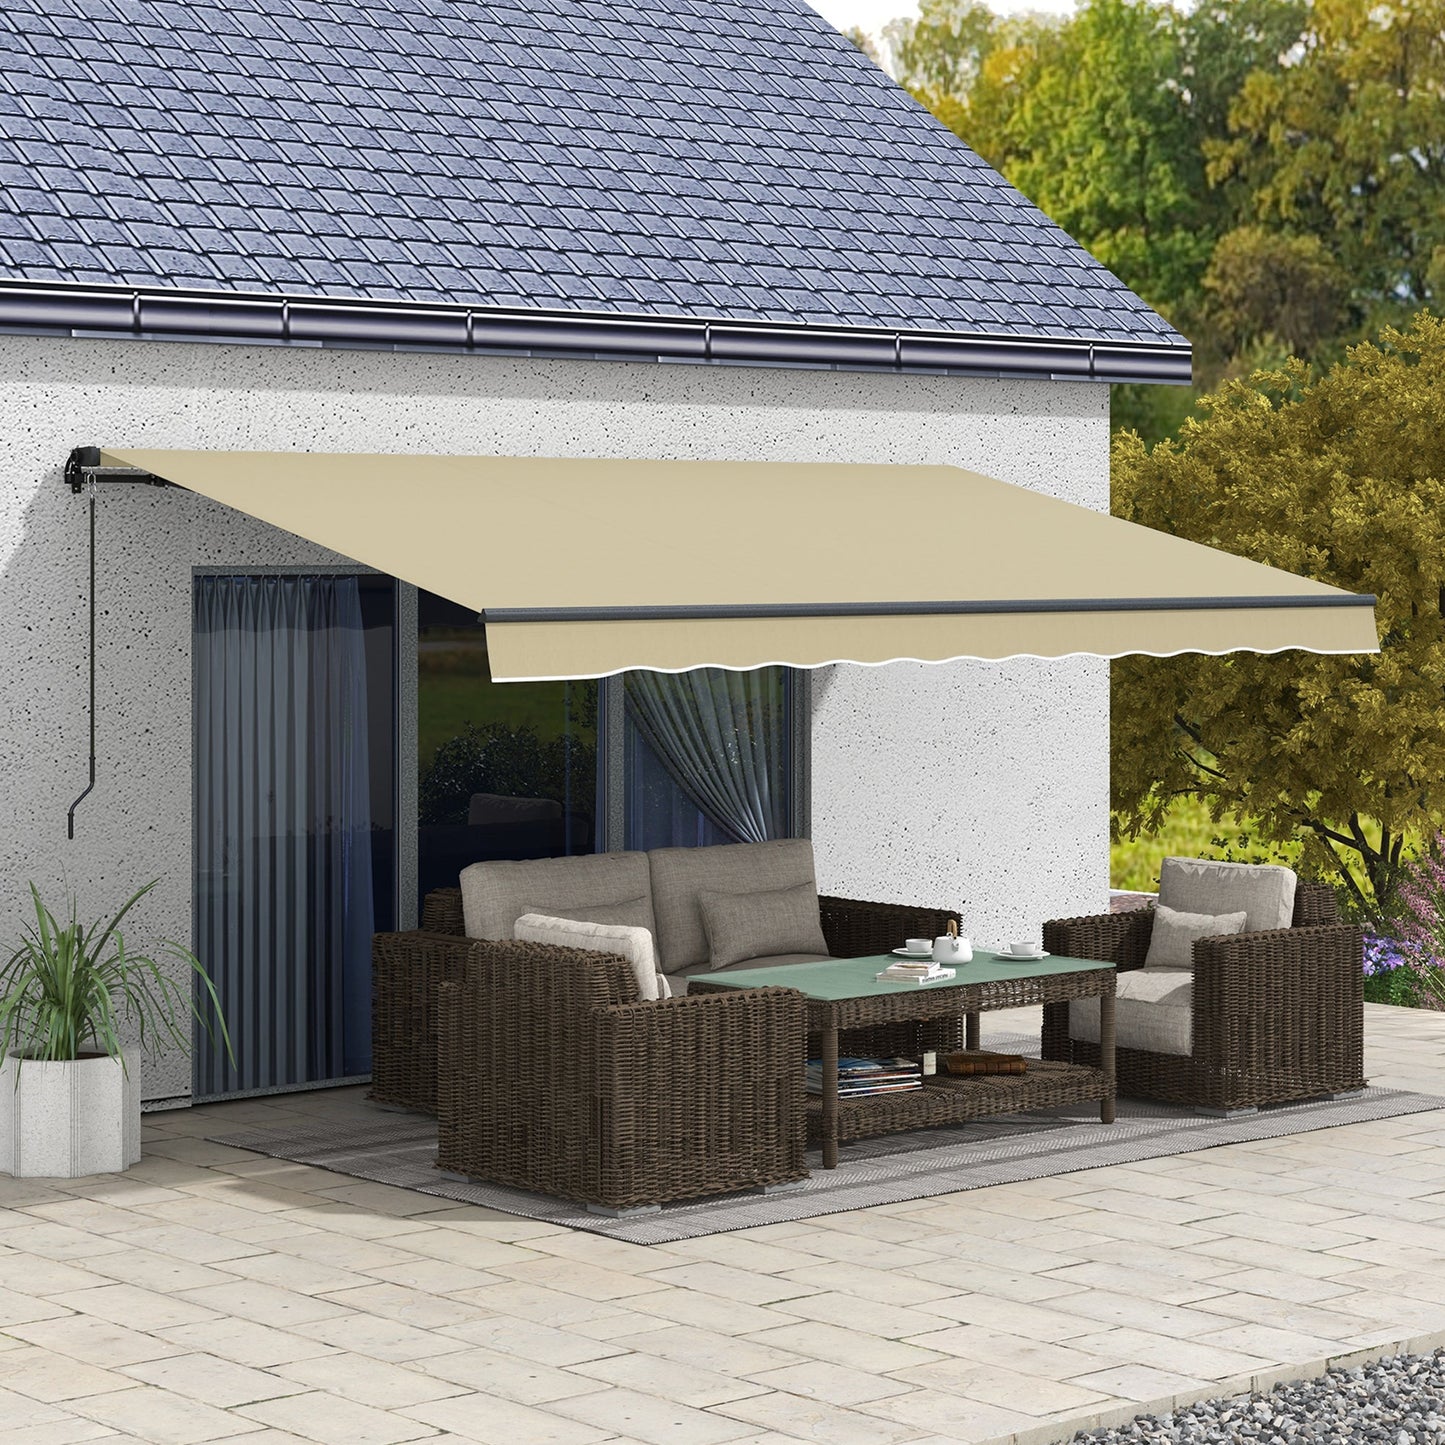 -Outsunny 16' x 10' Retractable Awning, 280gsm UV Resistant Sunshade Shelter for Deck, Balcony, Yard, Beige - Outdoor Style Company